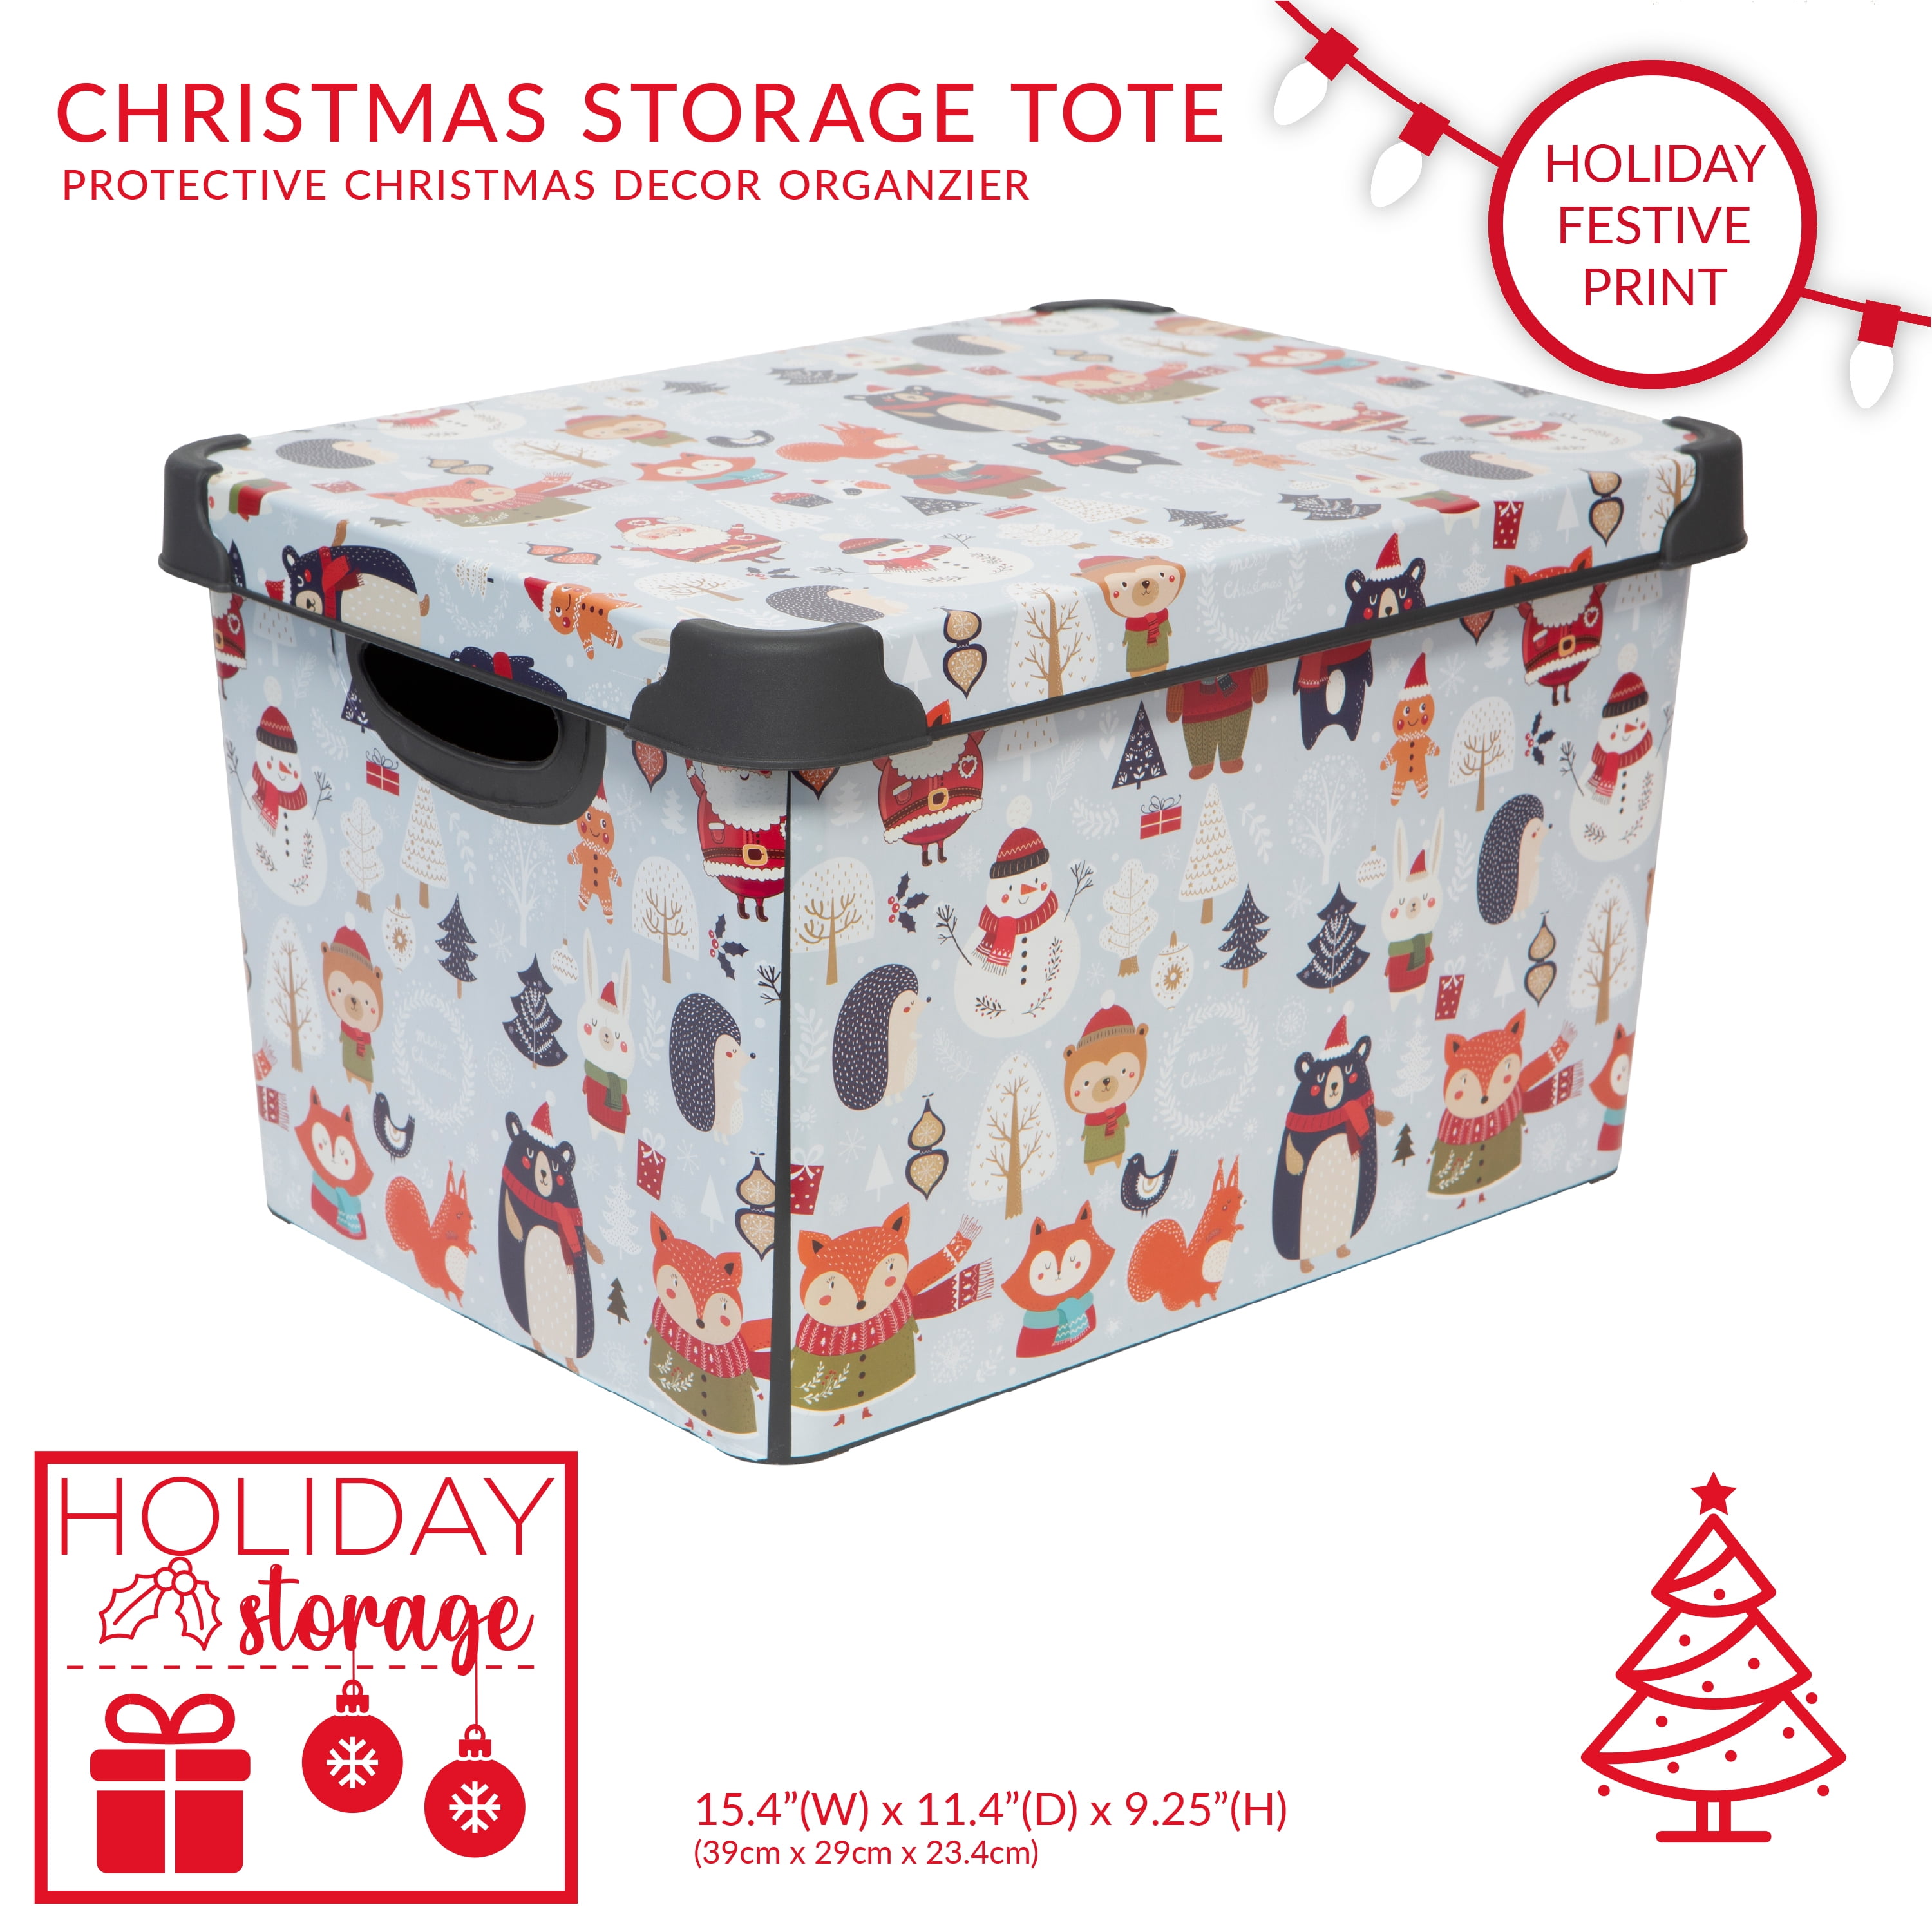 The Holiday Aisle® Happy Christmas Design Plastic Storage Tote & Reviews